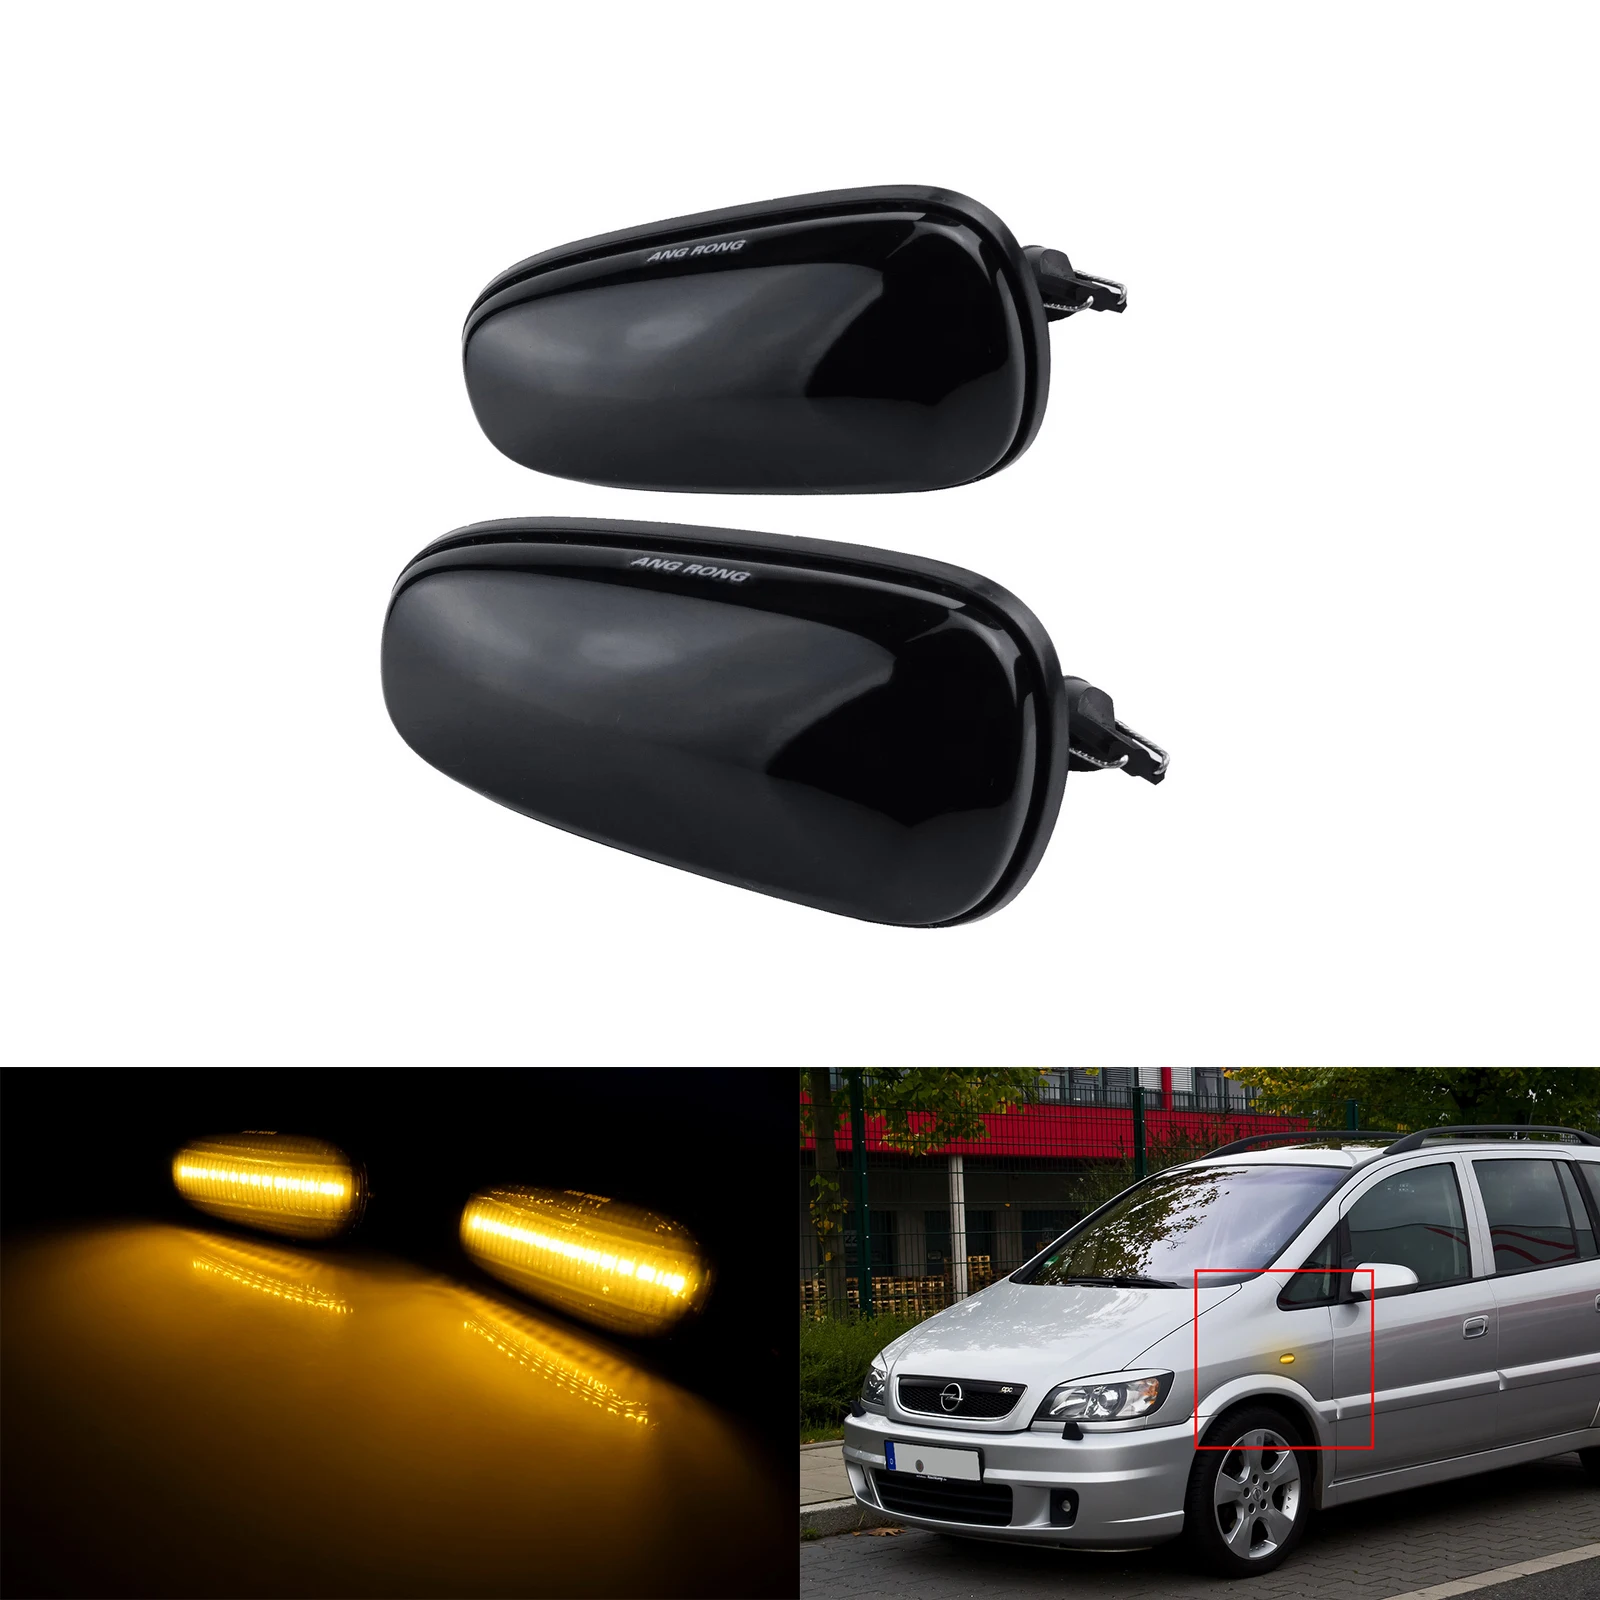 

ANGRONG 2X For Opel Vauxhall Astra G Zafira A 98-05 LED Side Repeater Indicator Light Amber Black Lens